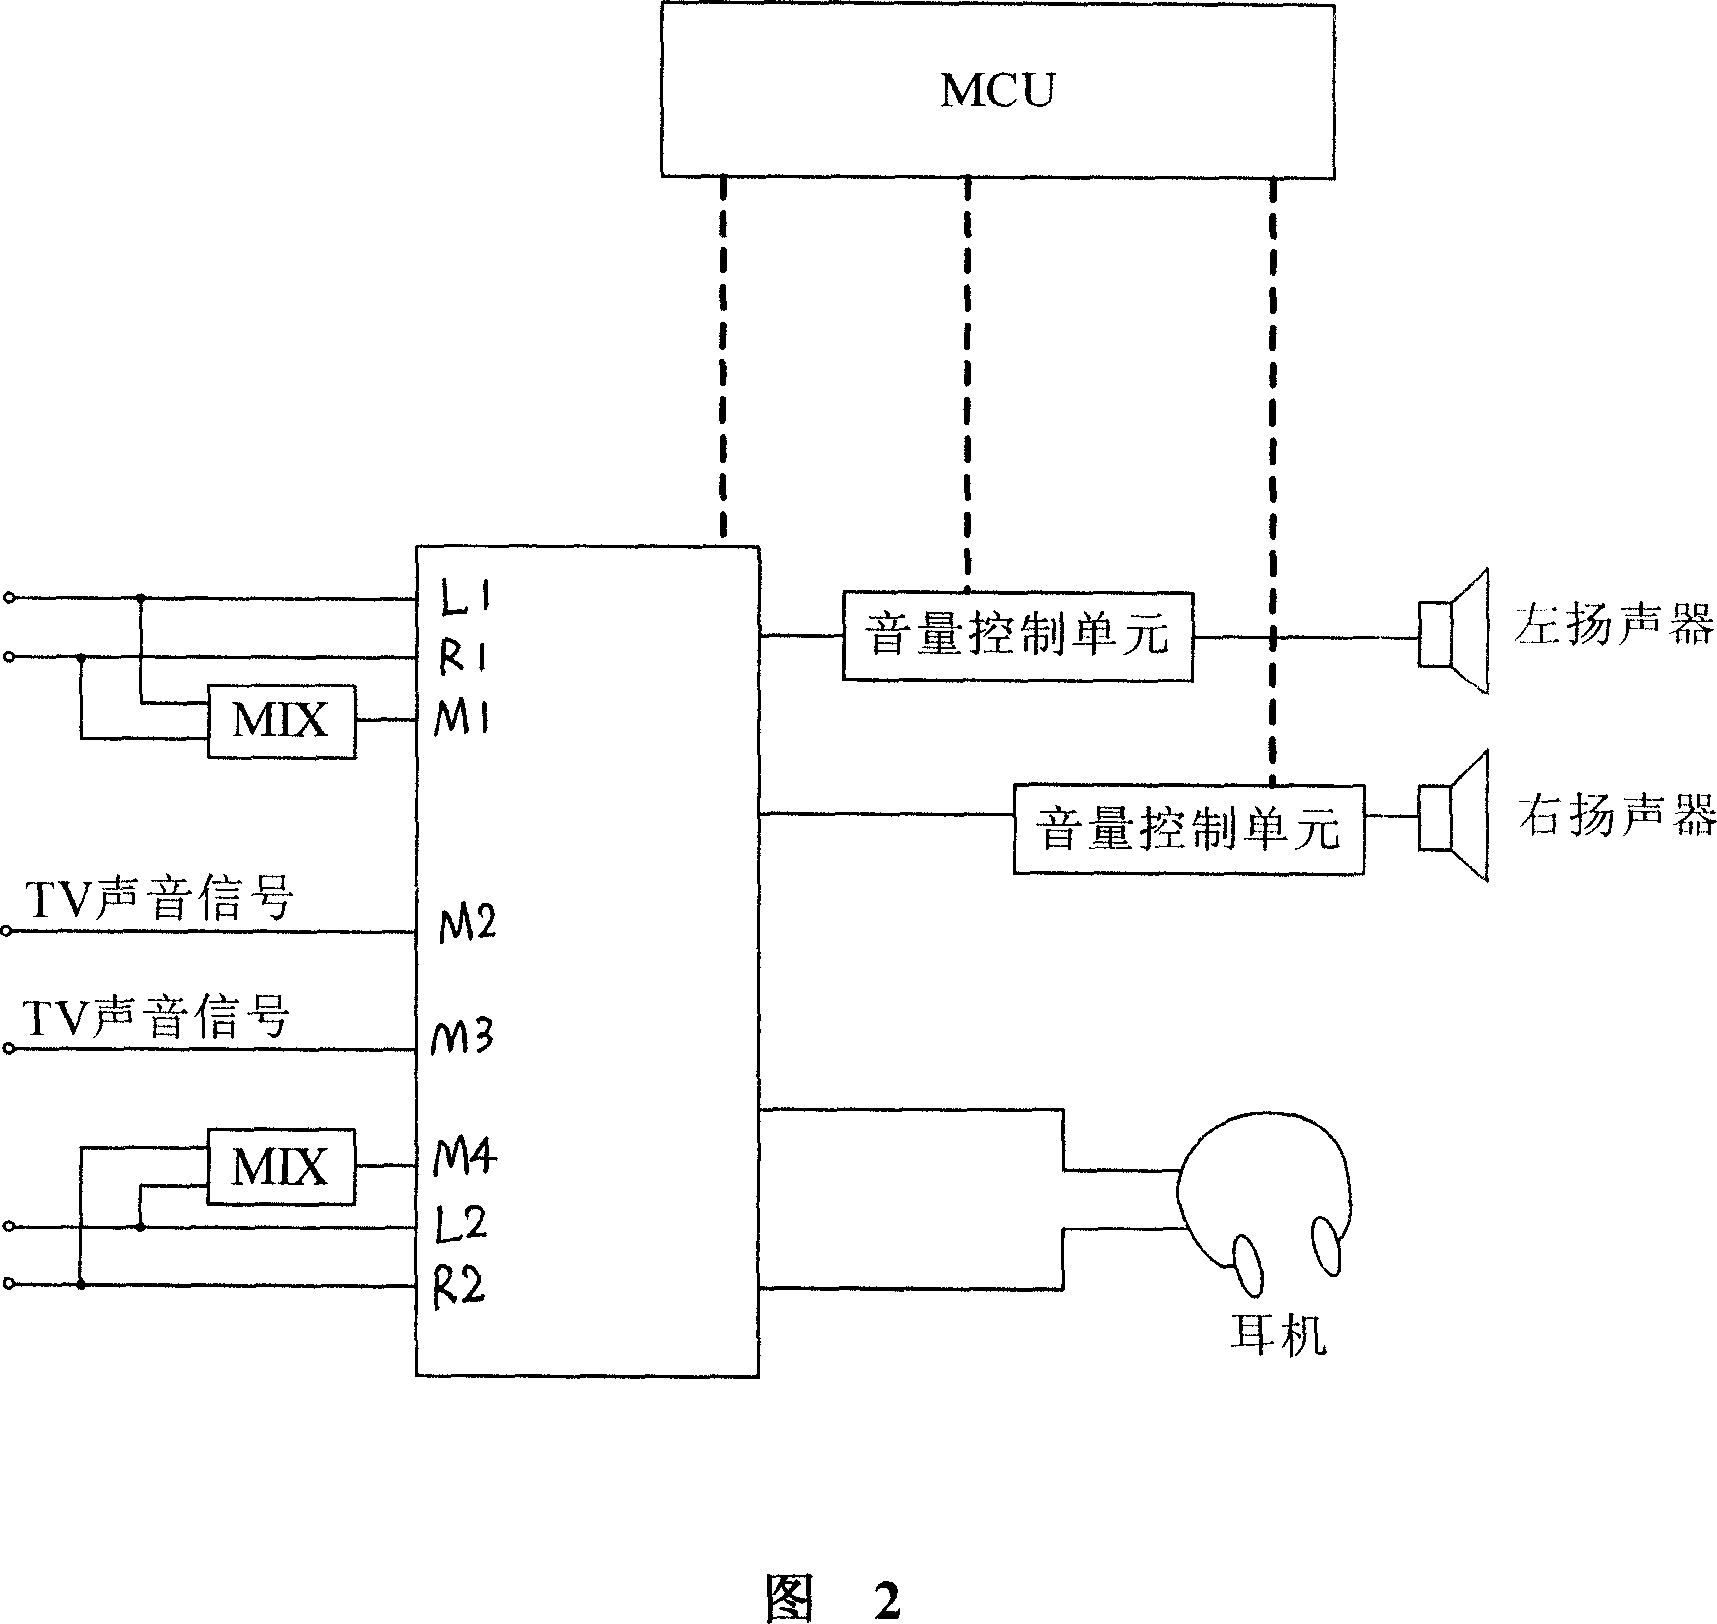 Multi-channel audio player and its control method